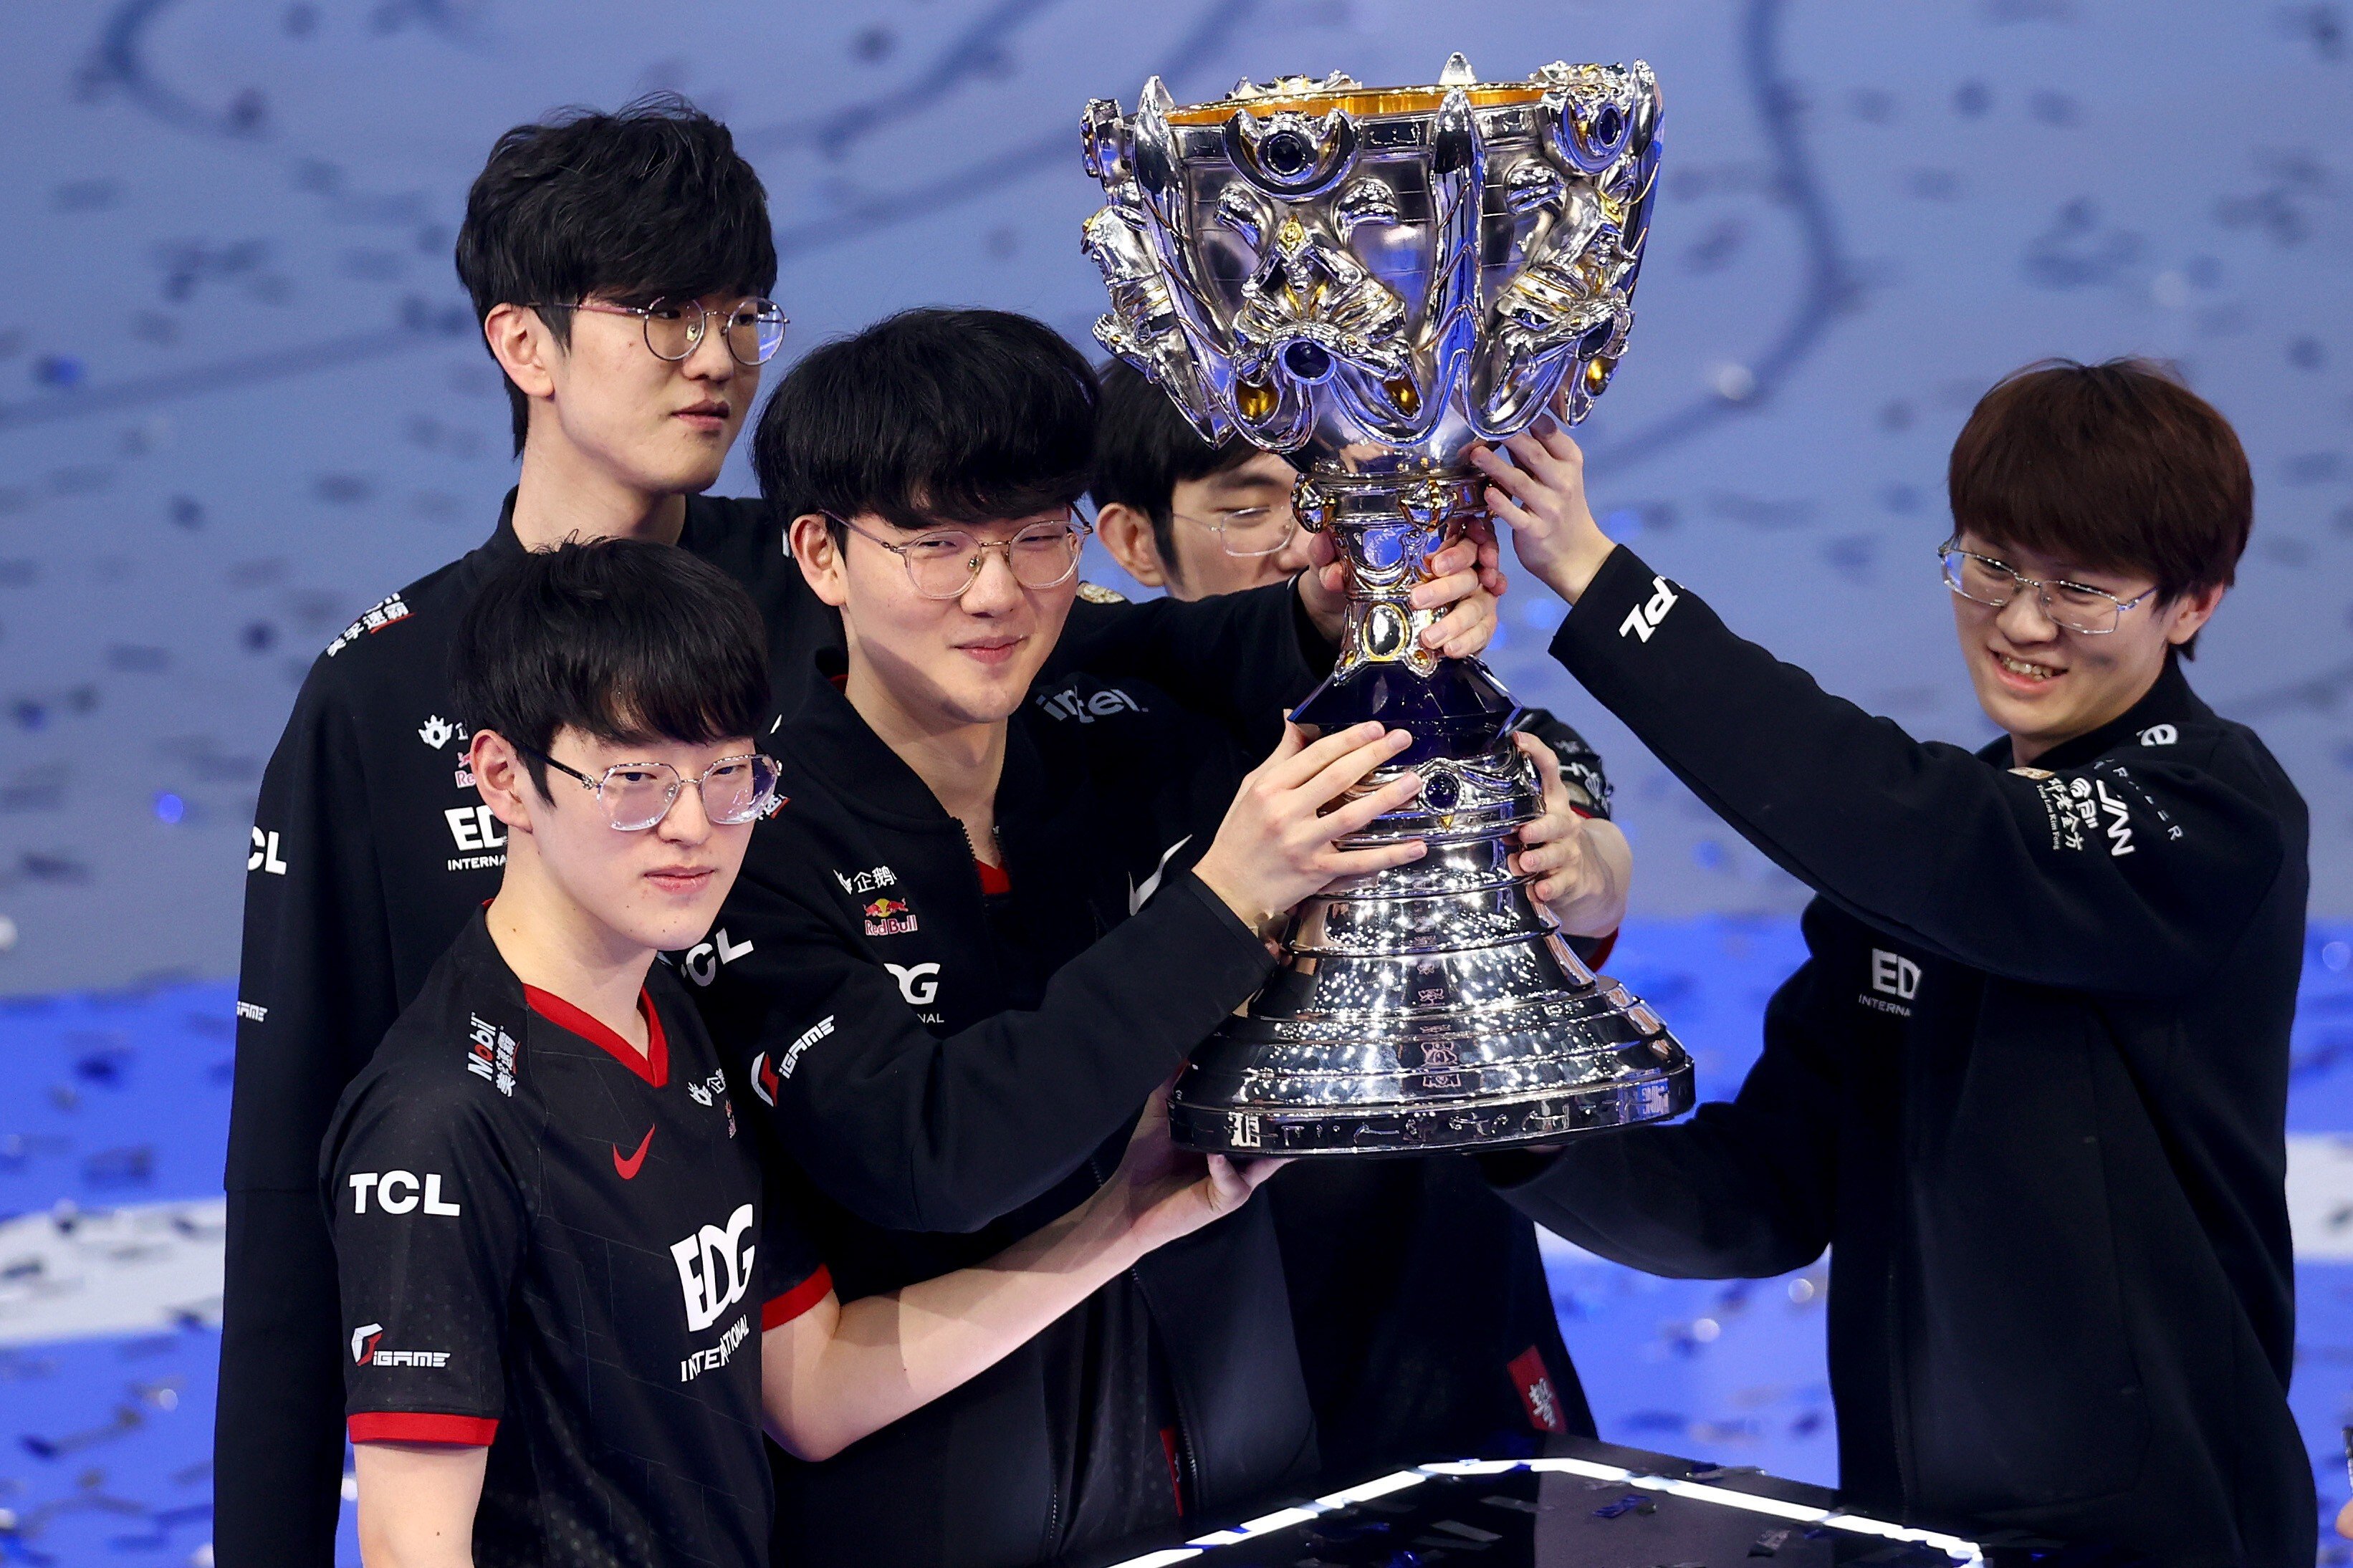 Edward Gaming celebrates with on stage after winning the League of Legends World Championship Finals on November 6, 2021 in Reykjavik, Iceland. Photo: Riot Games